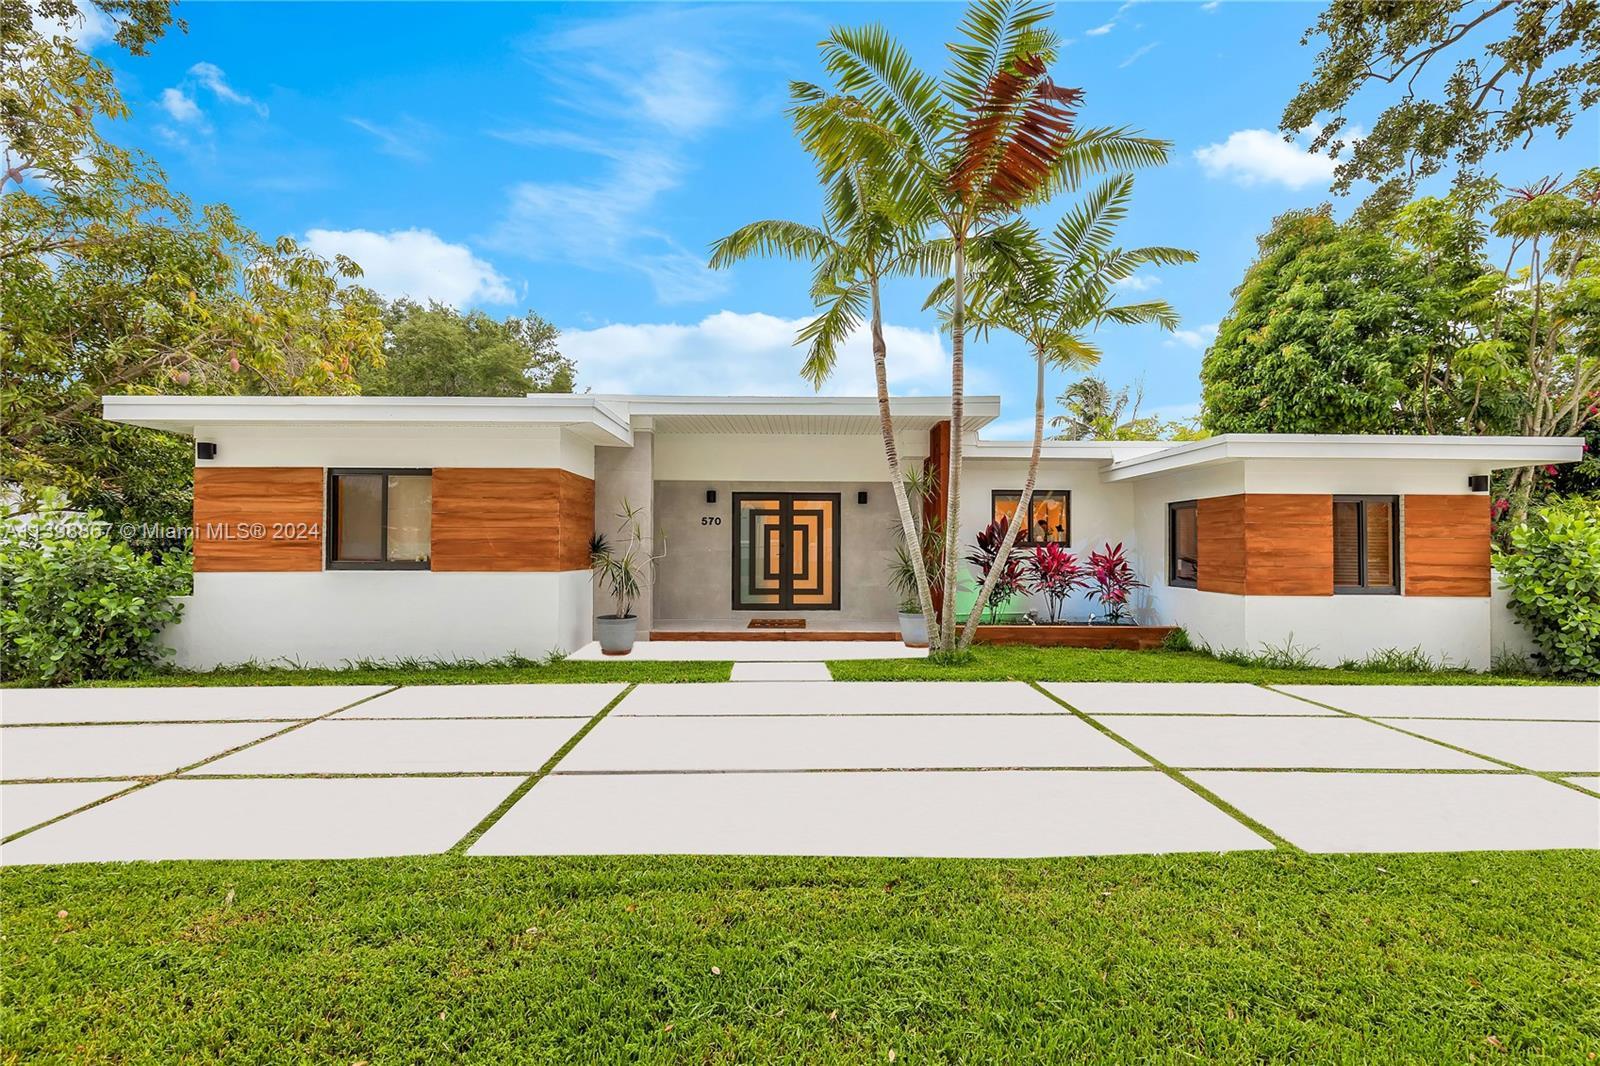 Be the first to live in this tastefully renovated 5 bed, 5 full bath home in central Miami Shores st